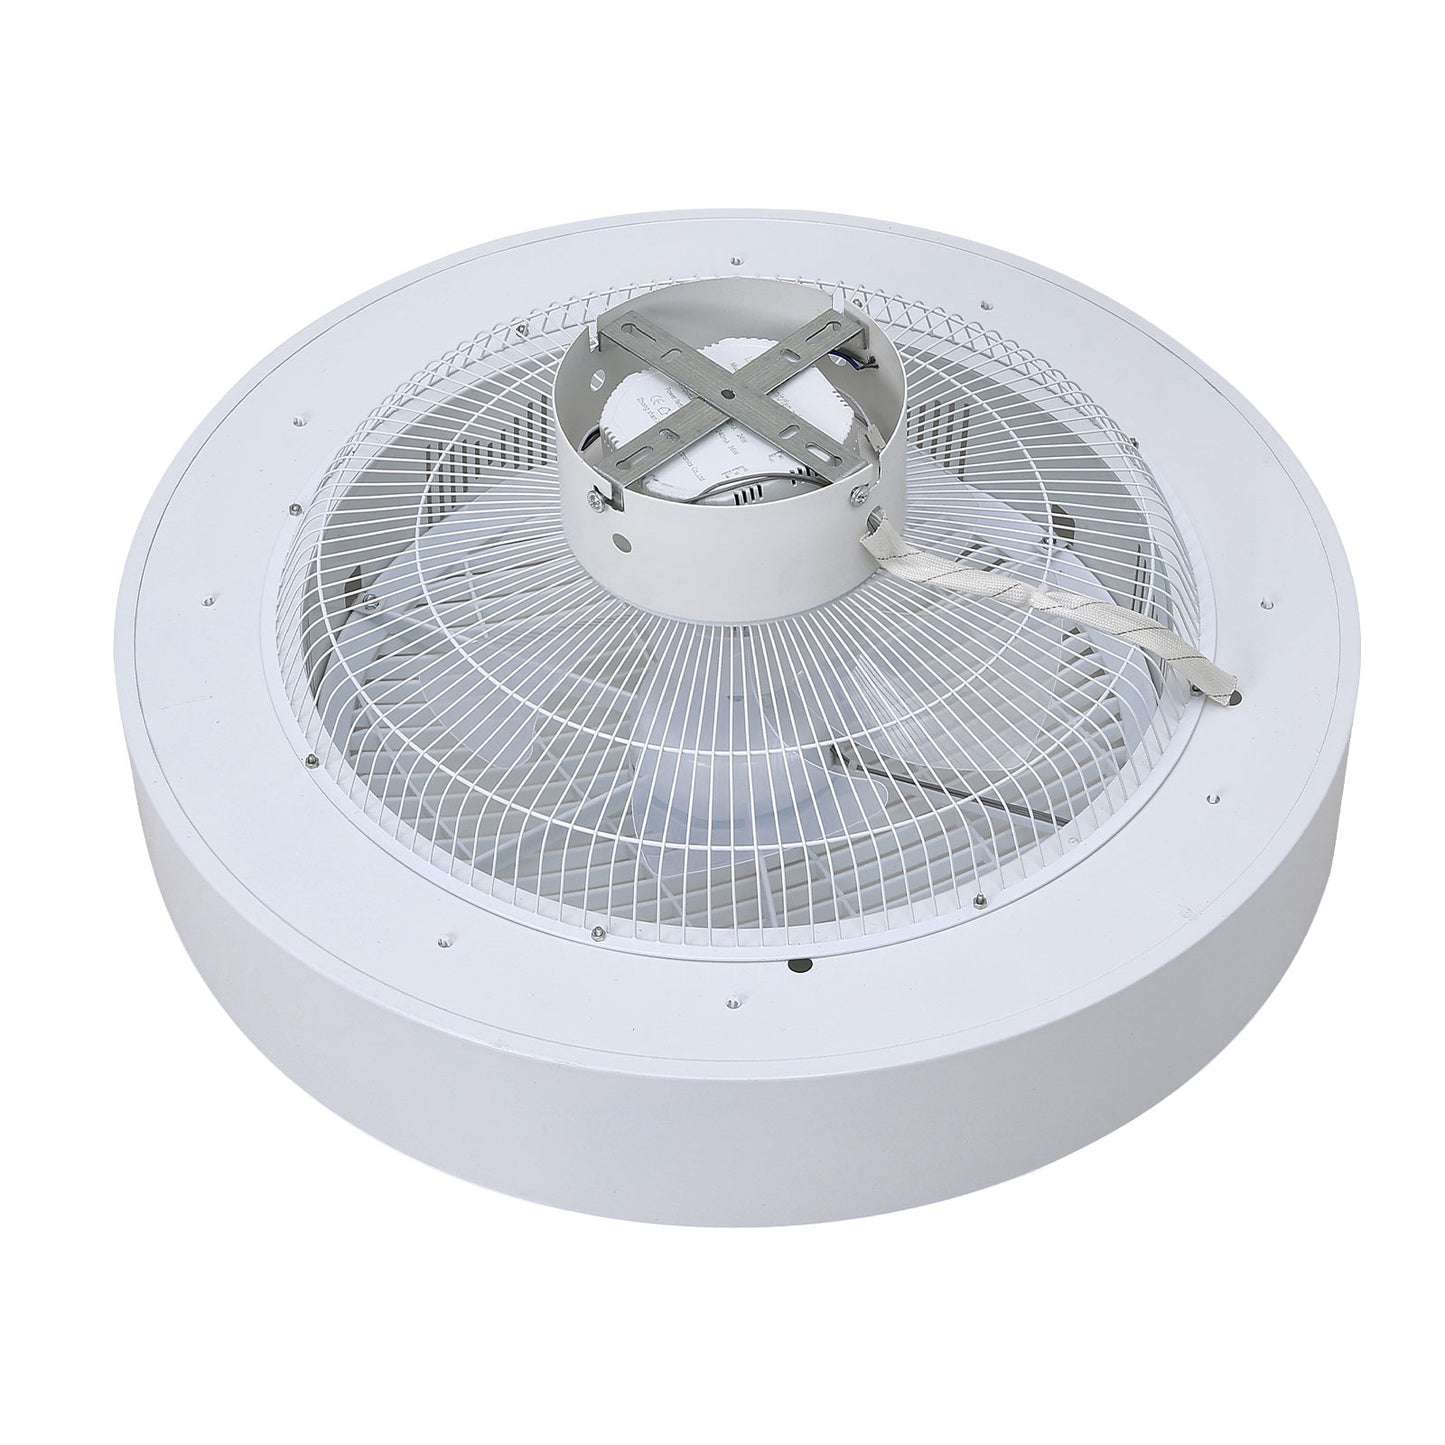 Round Acrylic LED Ceiling Light Fan with Remote Control